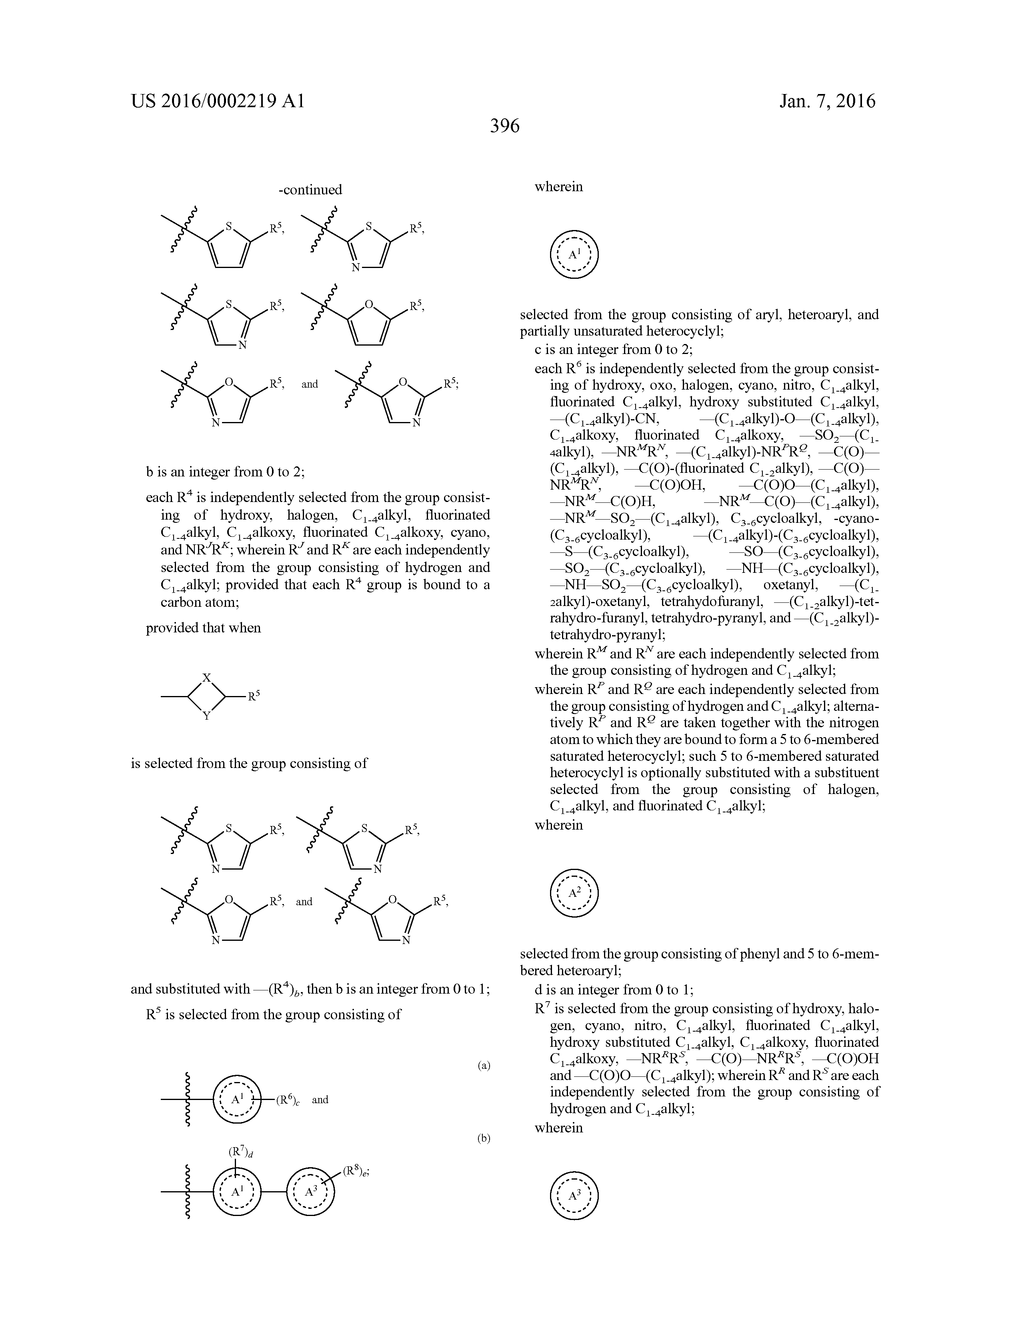 IMIDAZOLIN-5-ONE DERIVATIVE USEFUL AS FASN INHIBITORS FOR THE TREATMENT OF     CANCER - diagram, schematic, and image 397